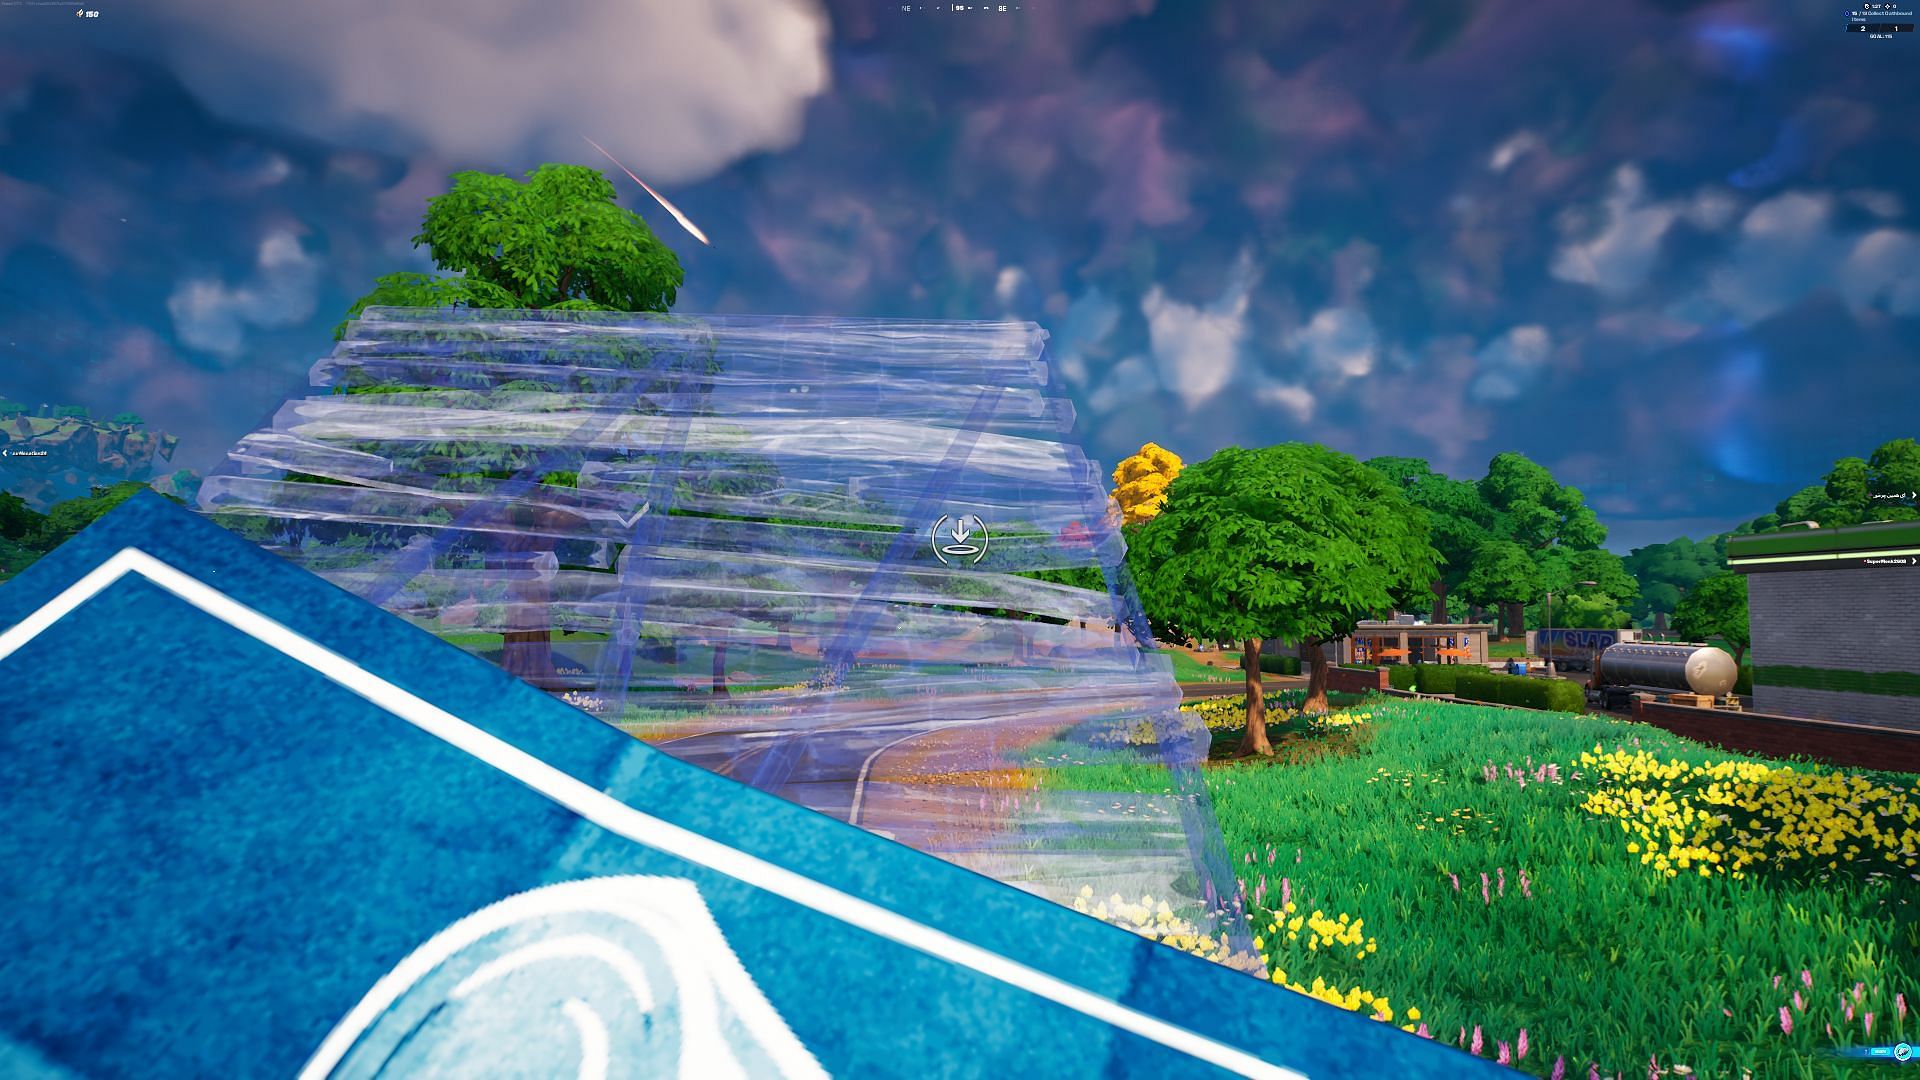 Building in first-person mode is a bit odd (Image via Epic Games/Fortnite)